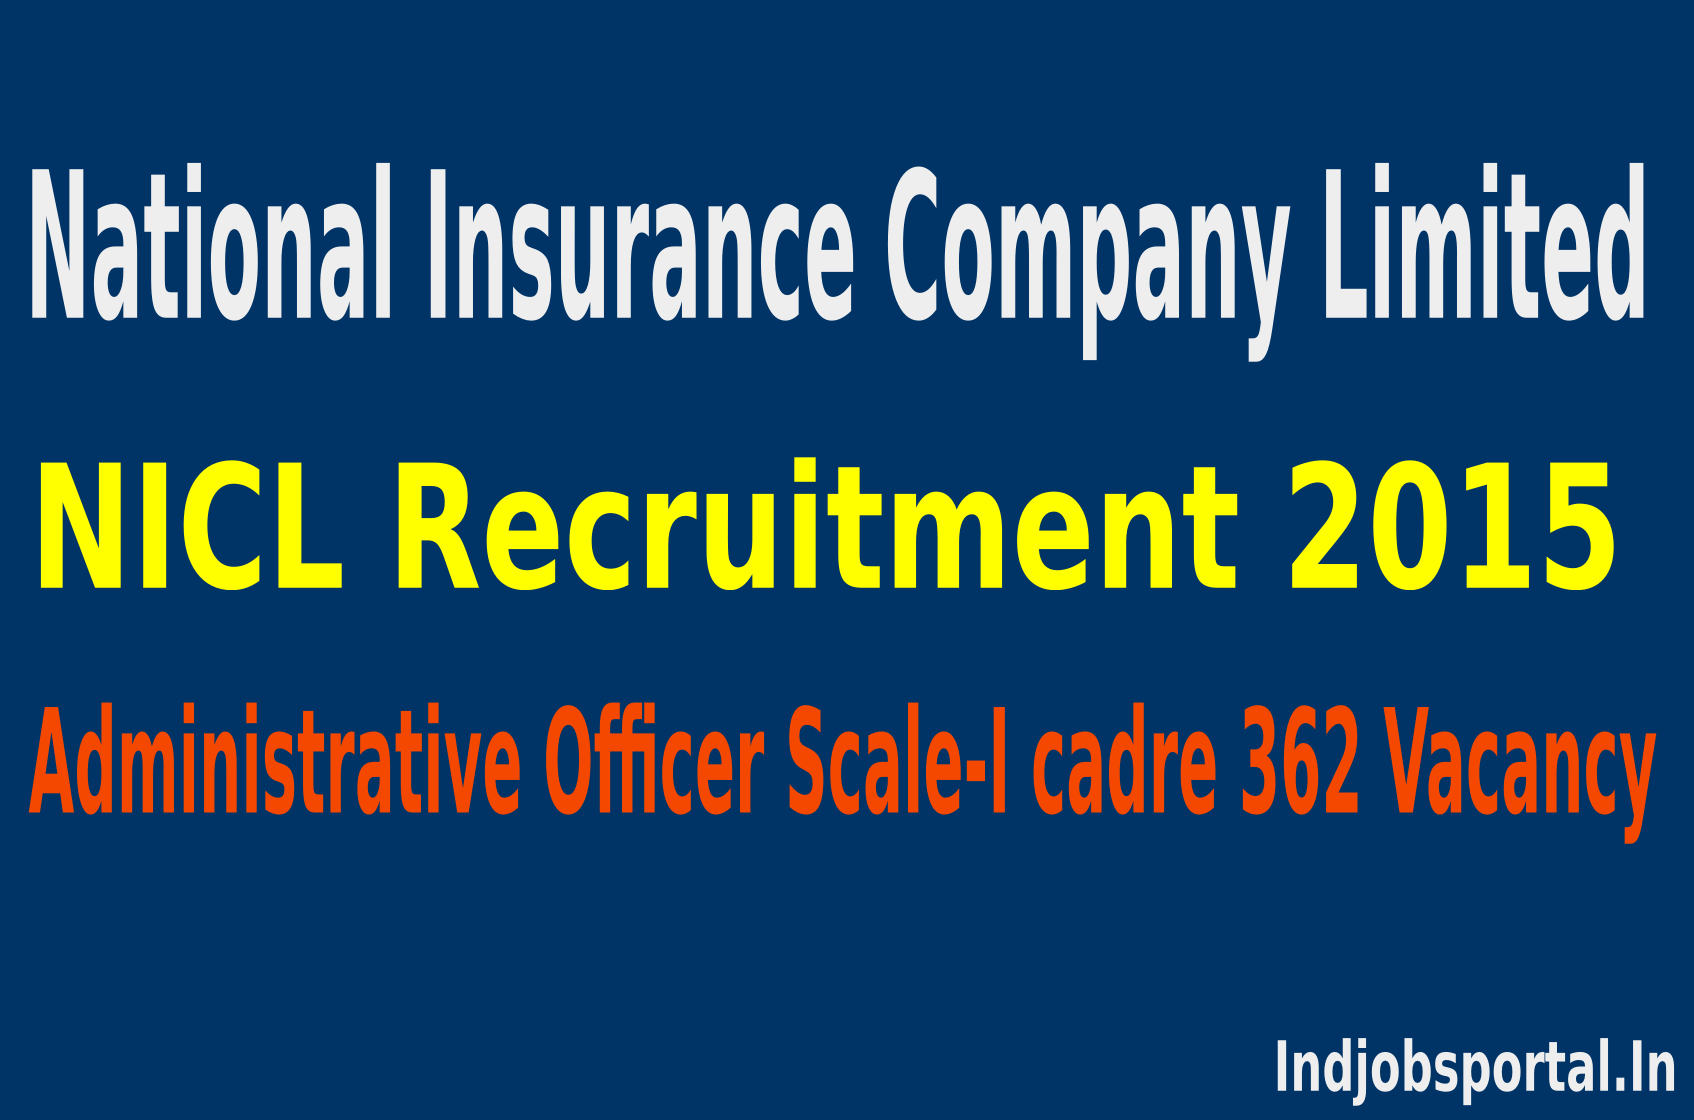 NICL Recruitment 2015 Apply Online For 362 Administrative Officer Posts